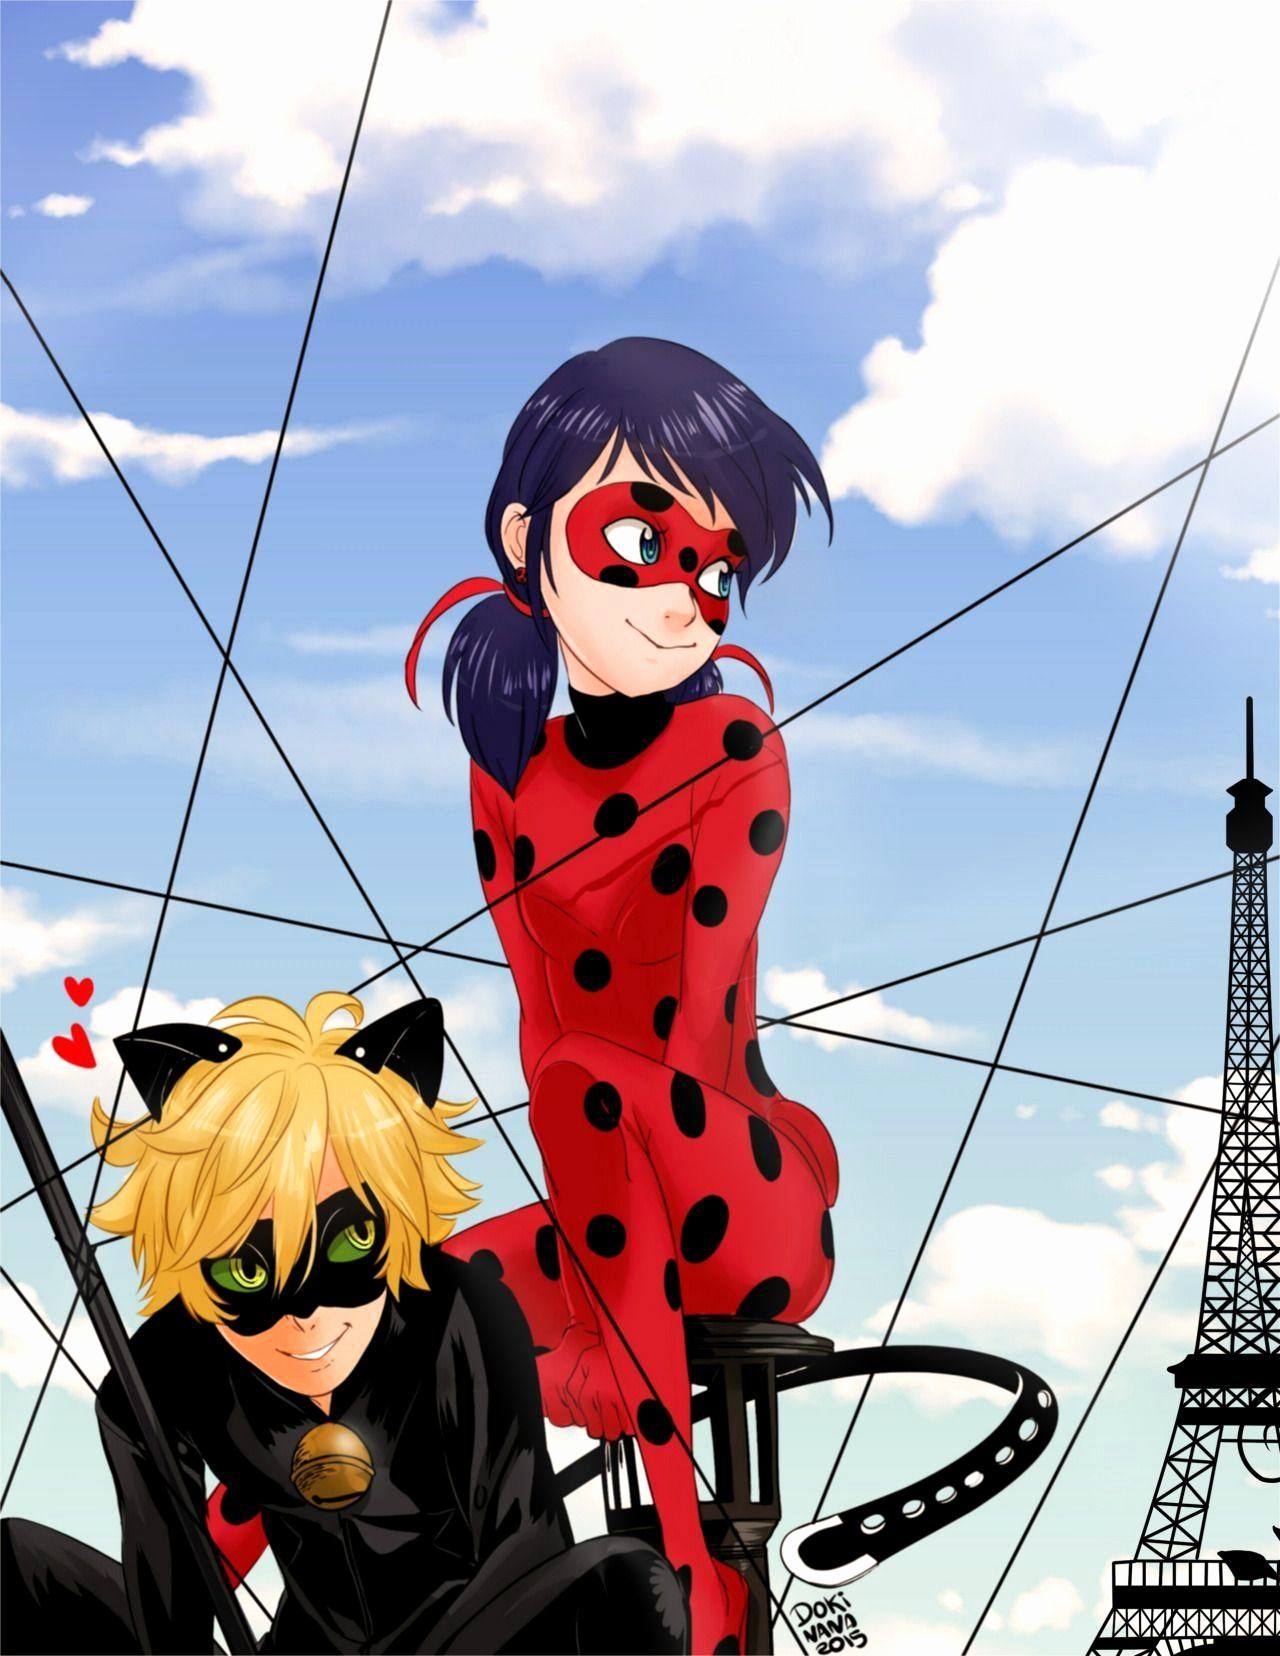 Is Miraculous Ladybug Anime? Where To Watch The Series?